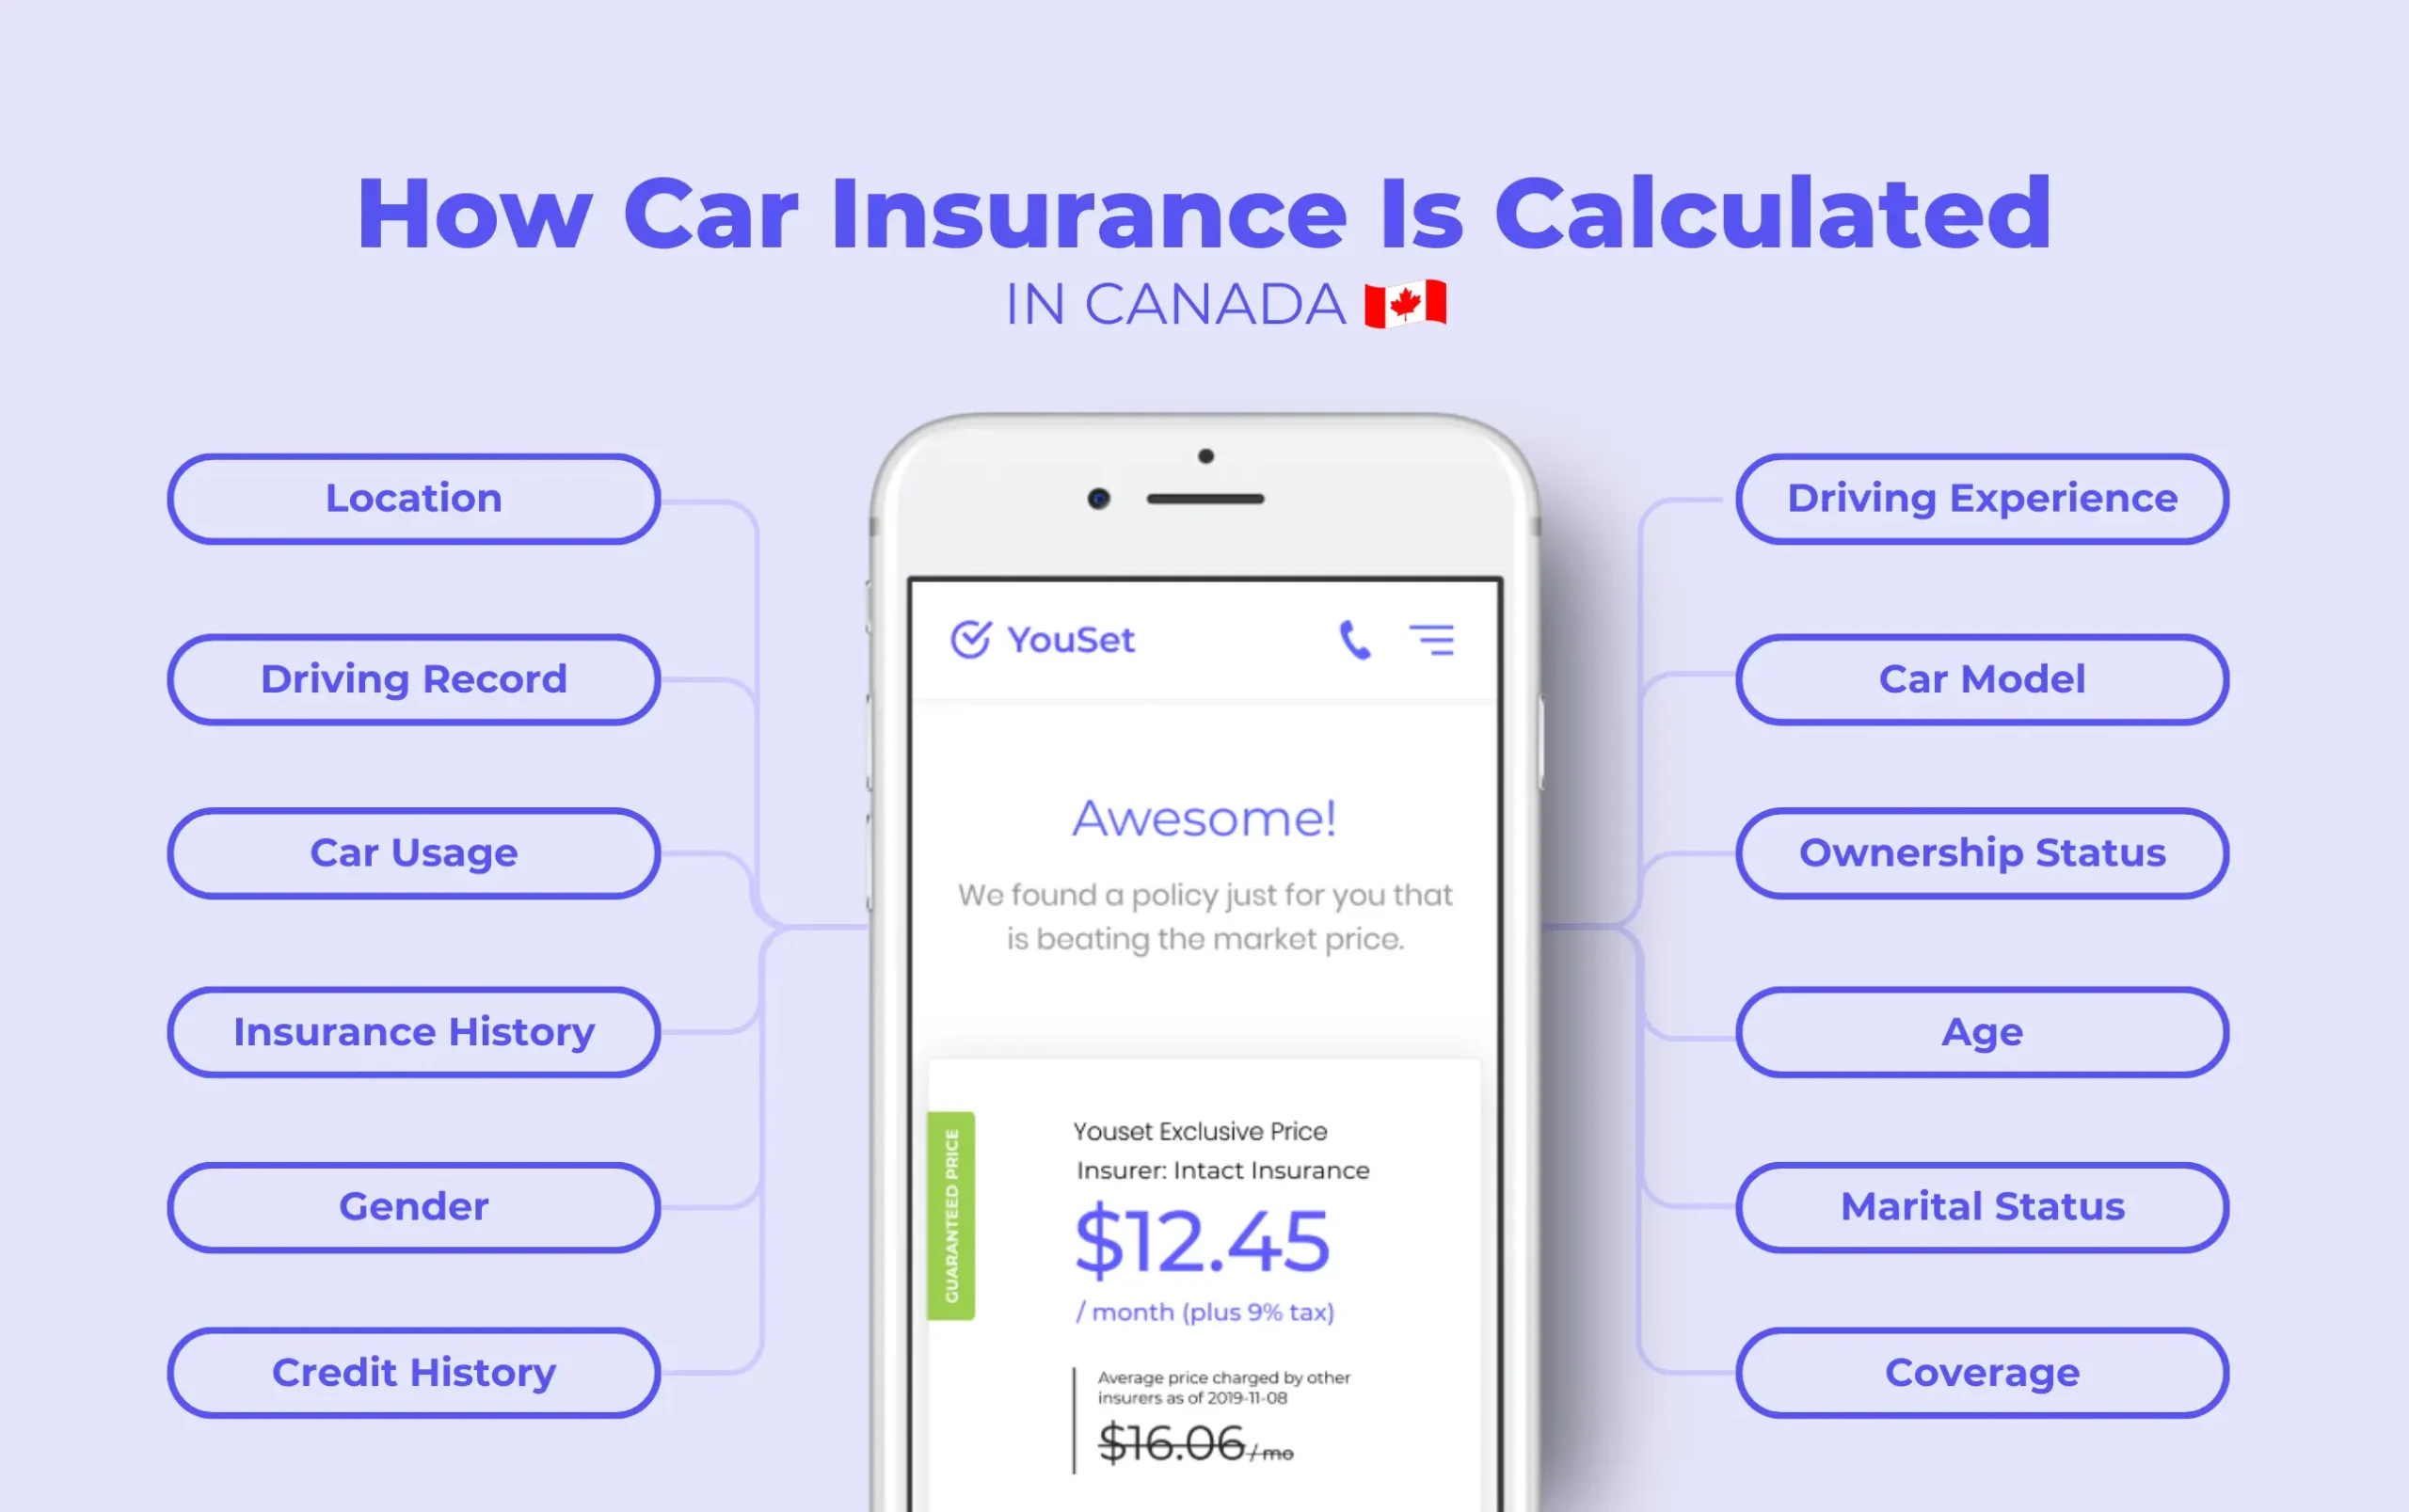 How Car Insurance Is Calculated in Canada